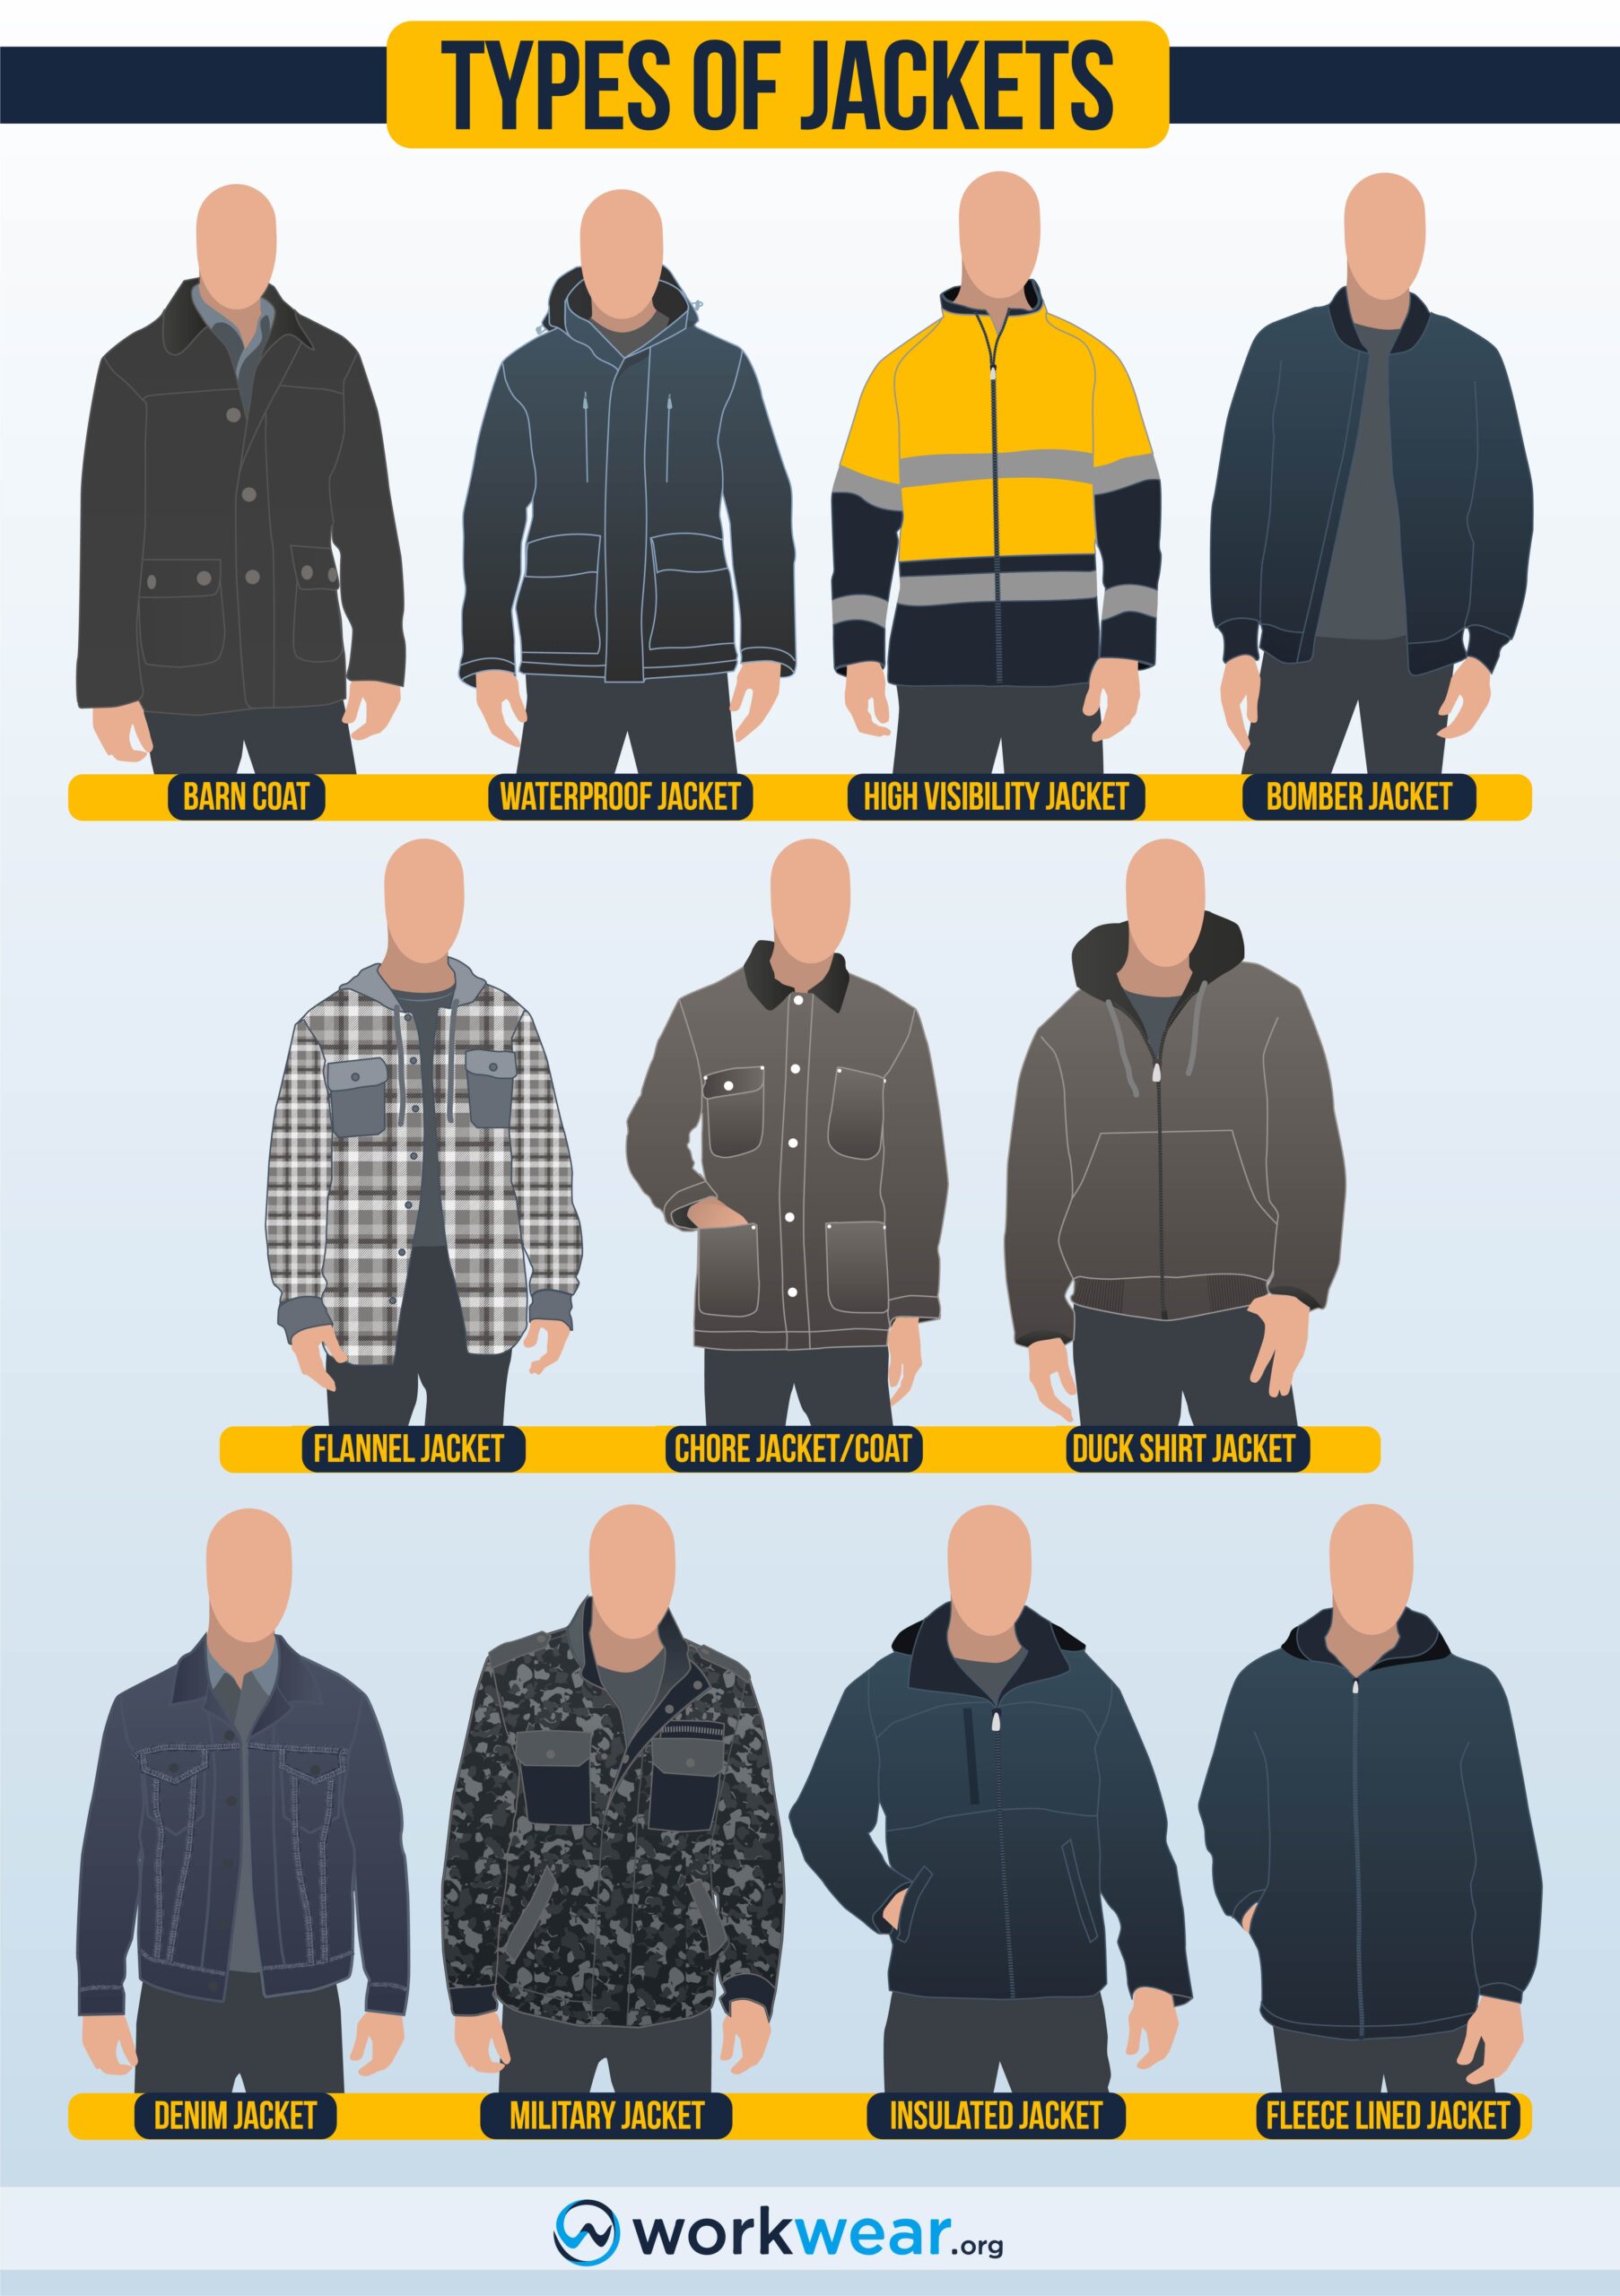 Main Types of Work Jackets | WorkWear.org